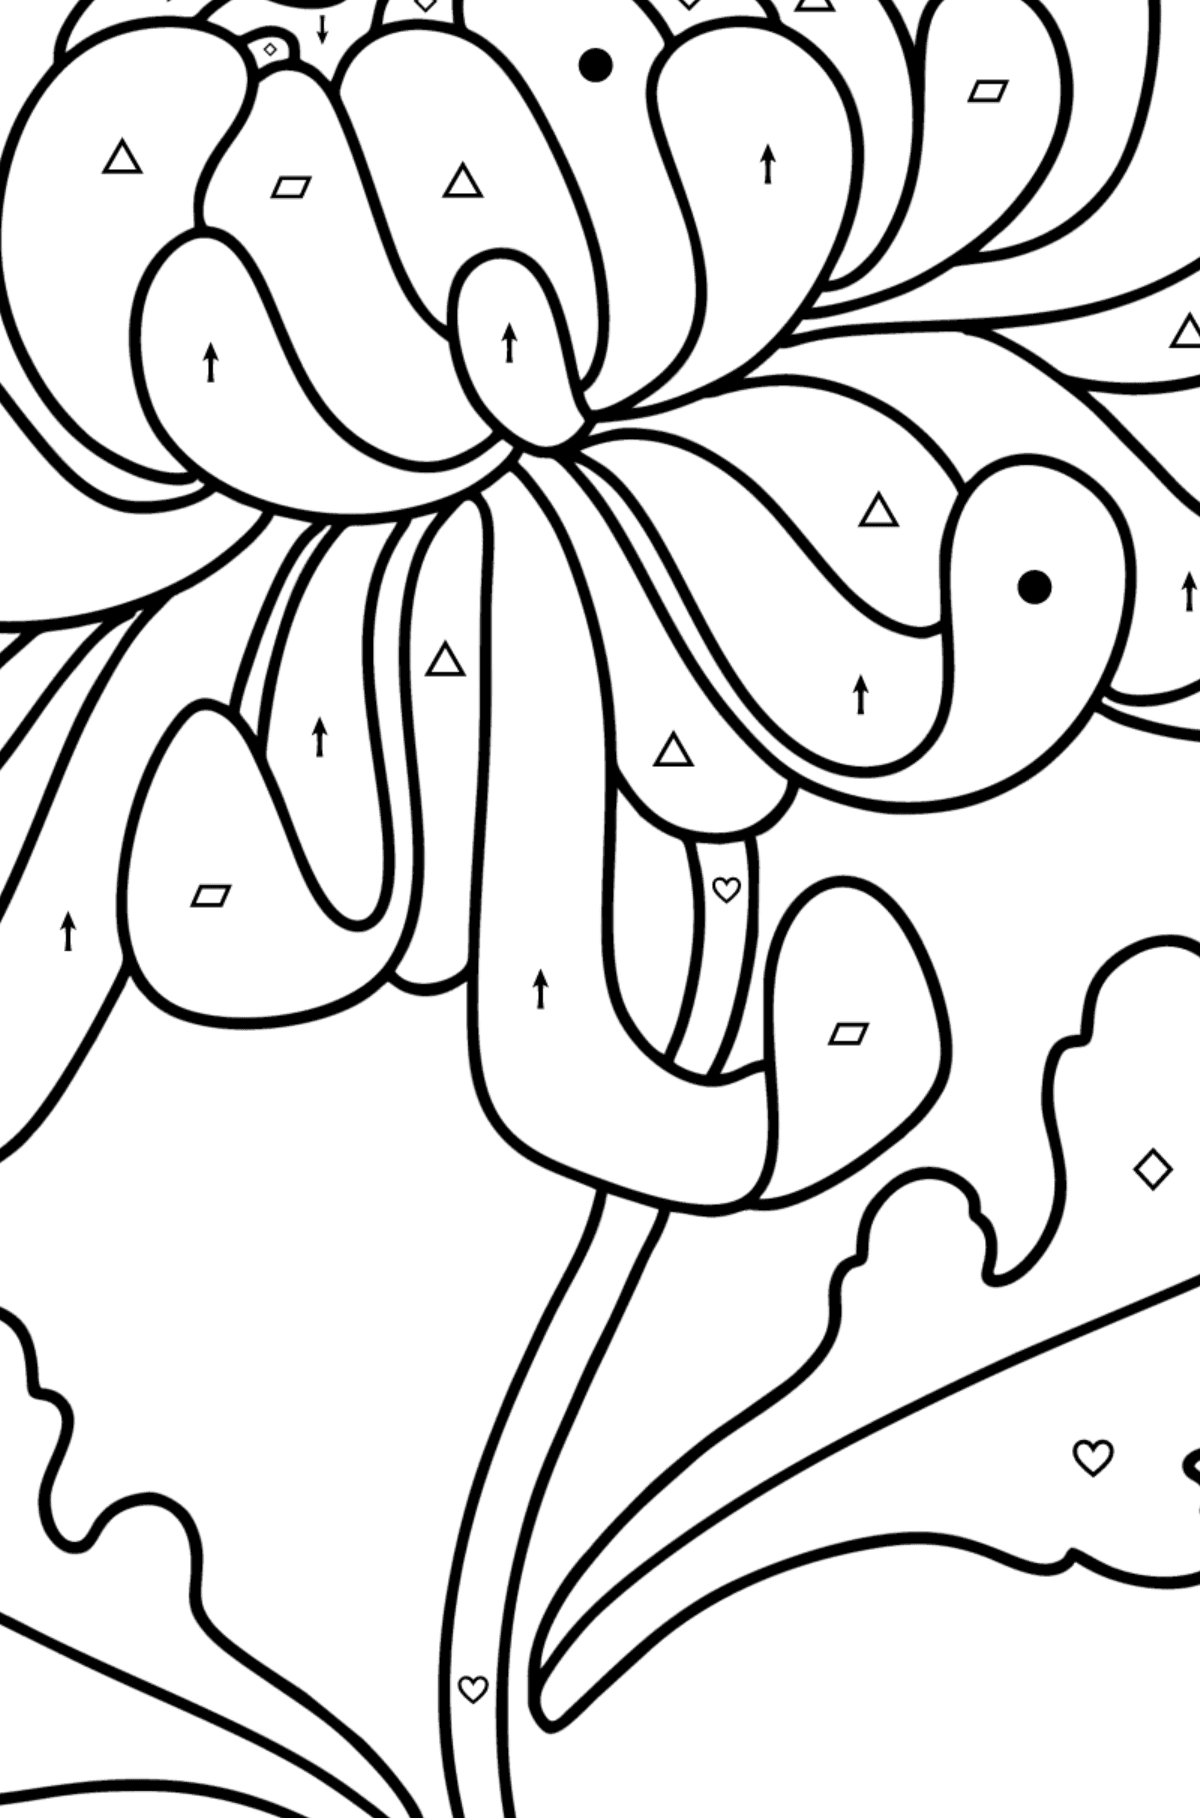 Chrysanthemums coloring page - Coloring by Symbols and Geometric Shapes for Kids